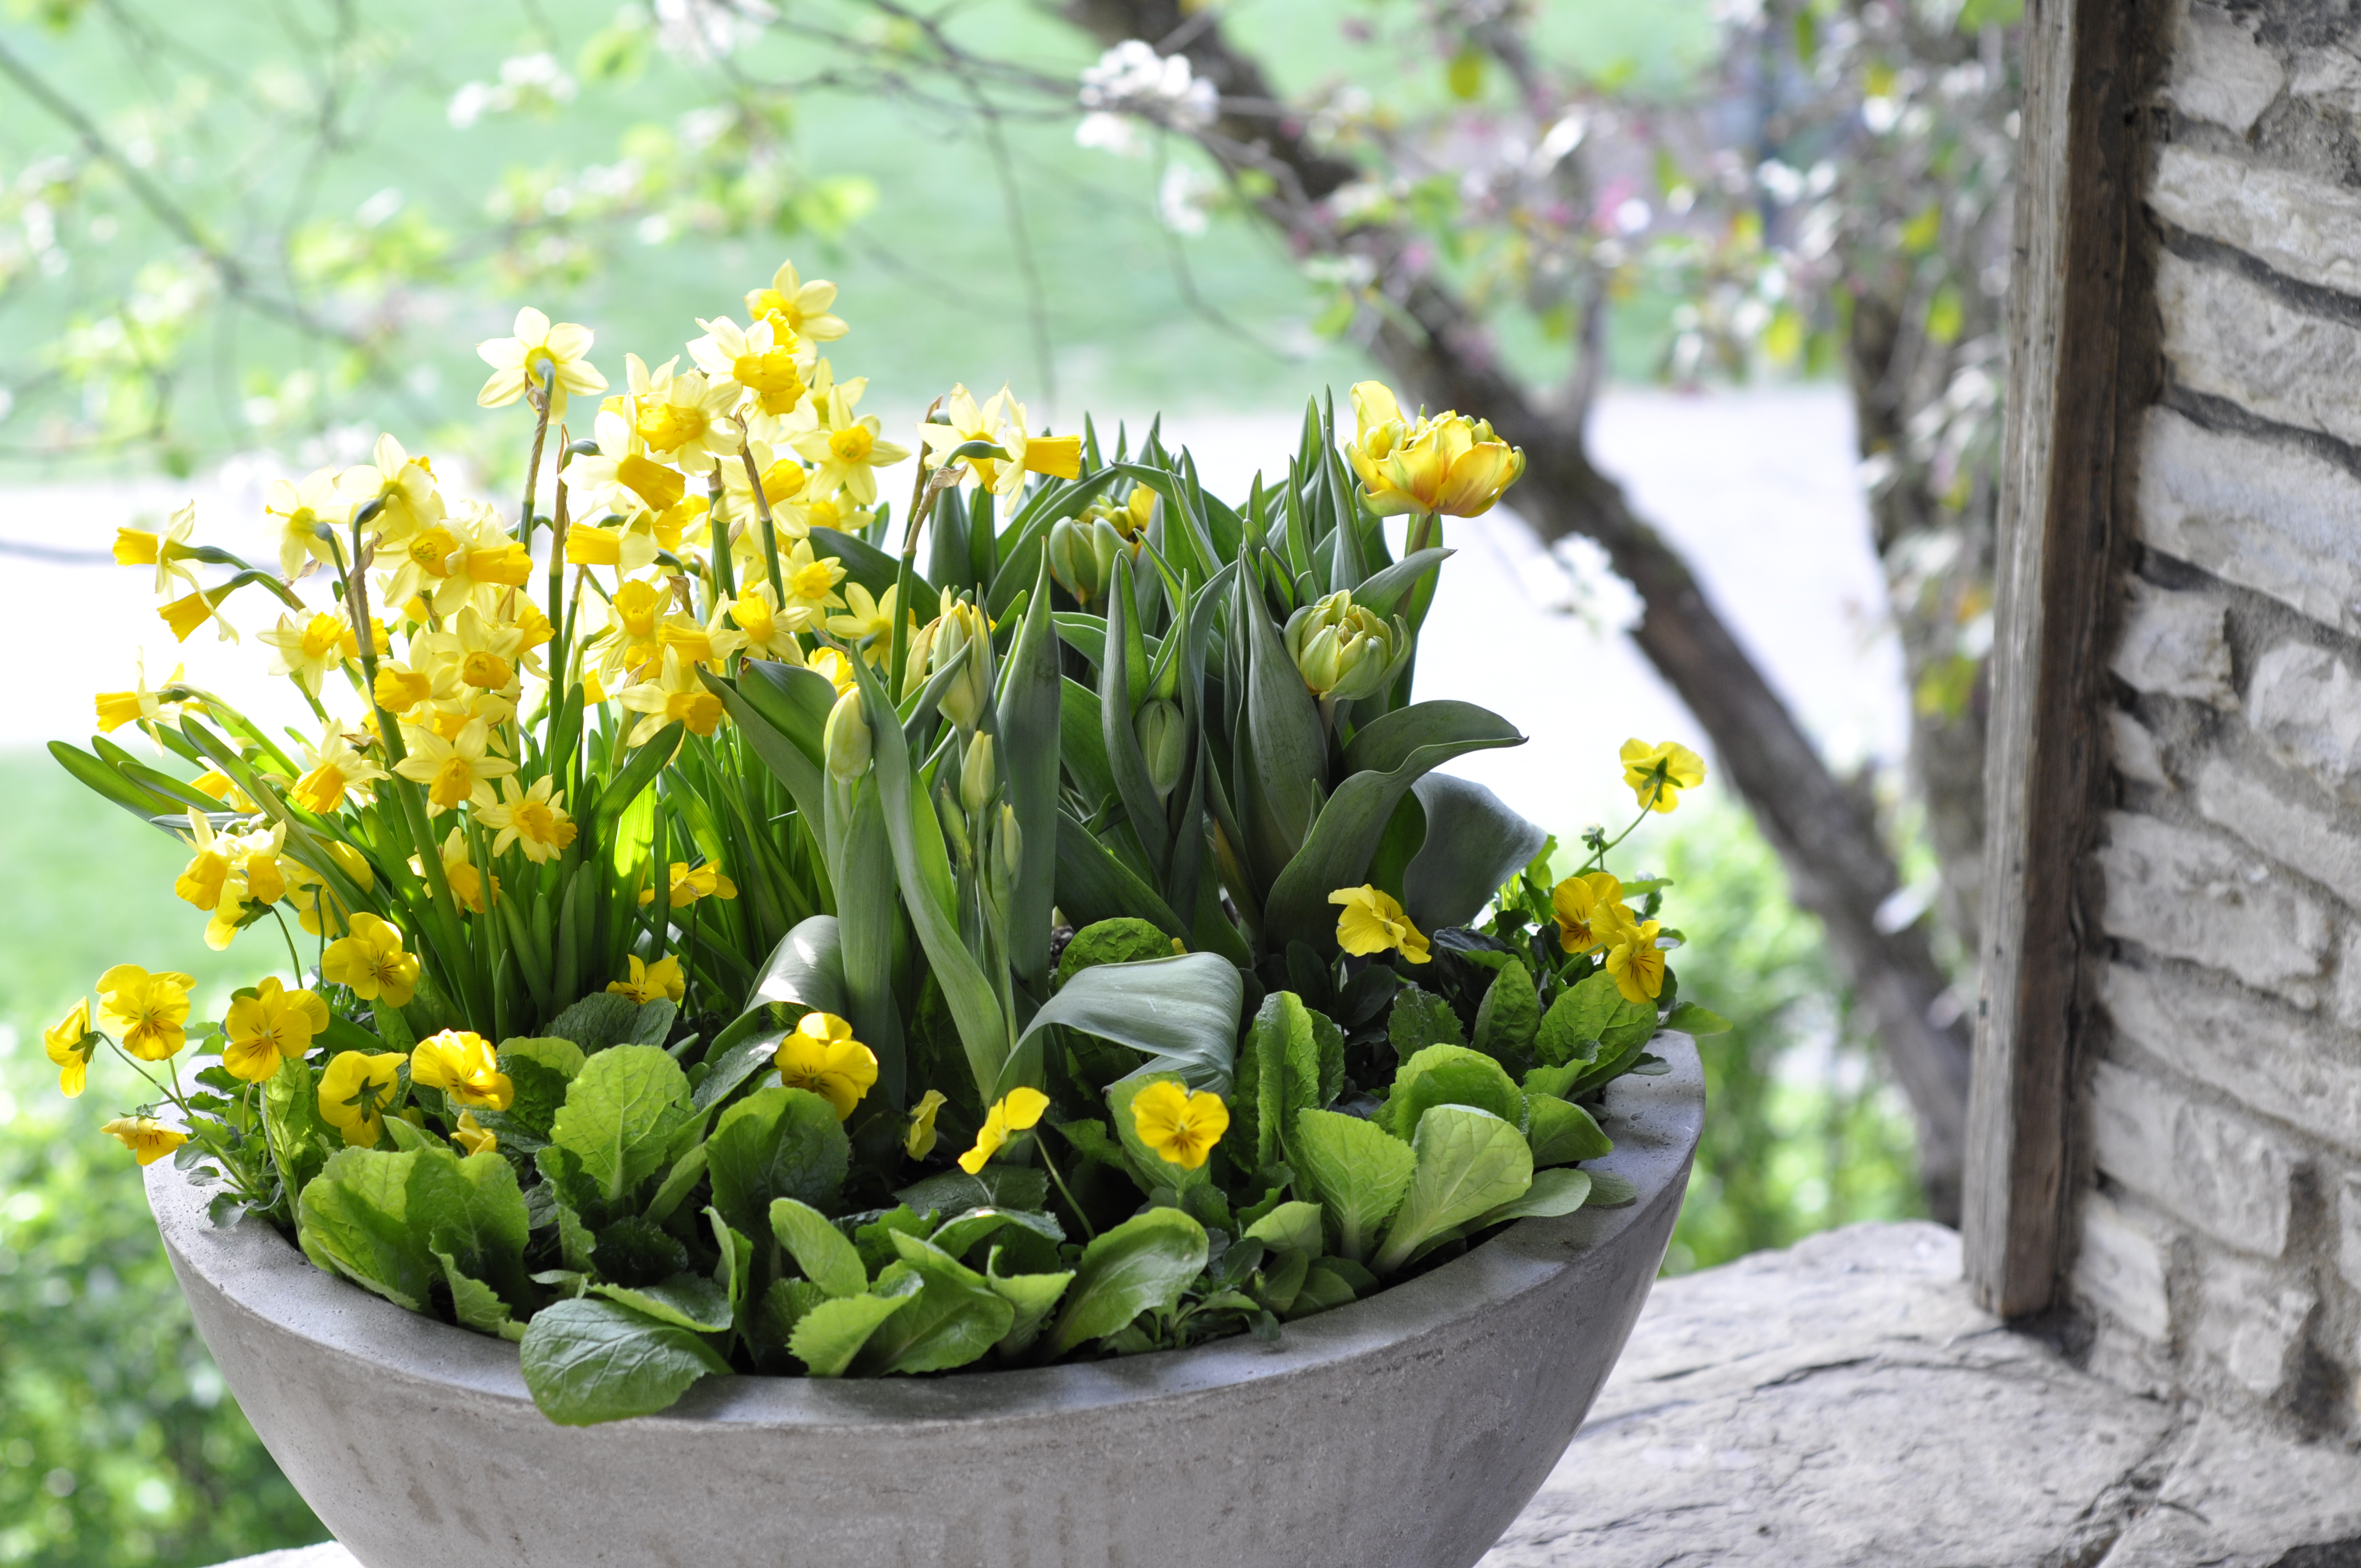 Spring Bulbs Inspiration from nature with daffodils, tulips and snowdrops - More on ThinkingOutsideTheBoxwood.com 